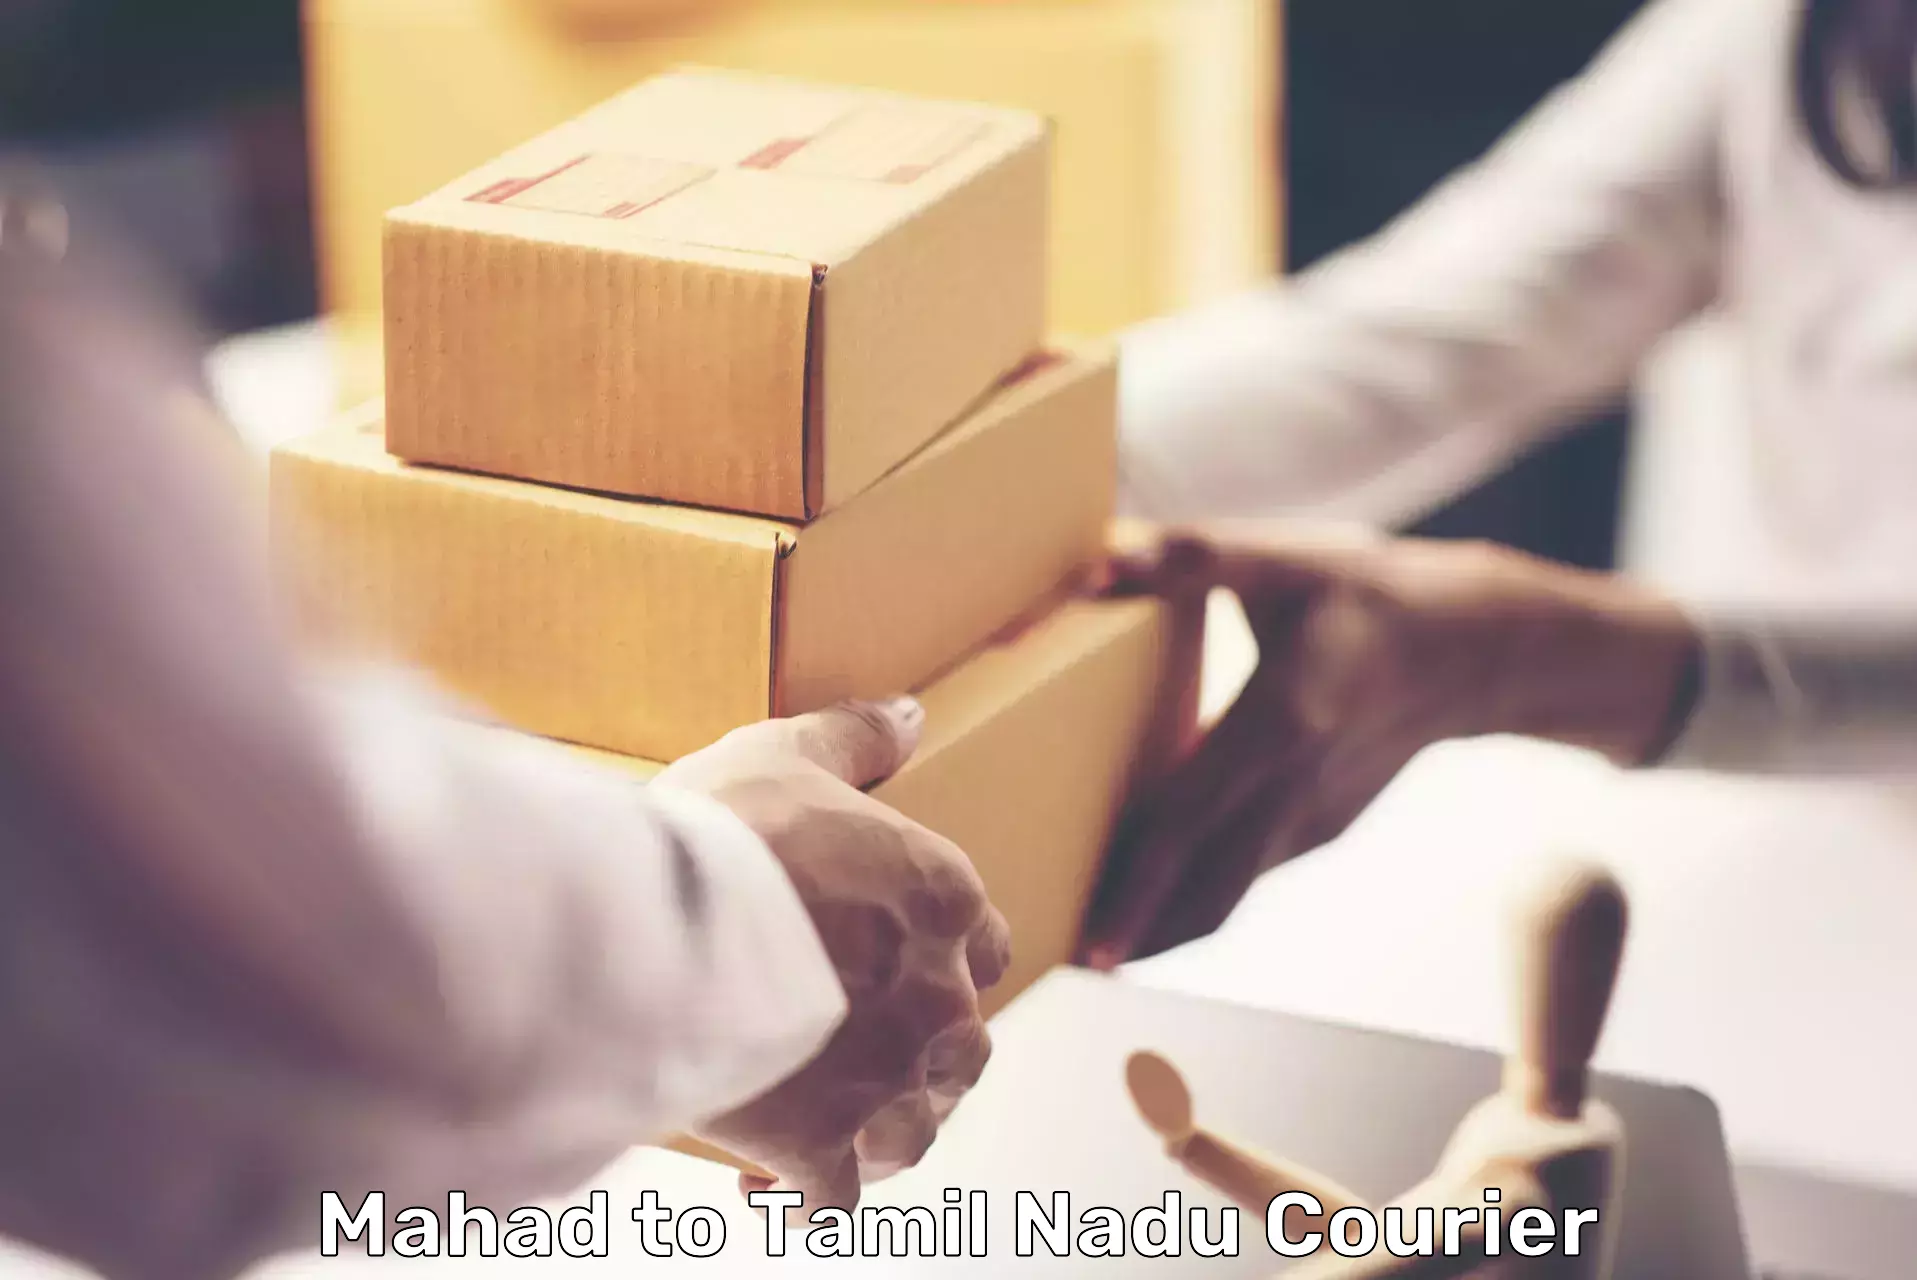 Residential courier service Mahad to Anthiyur